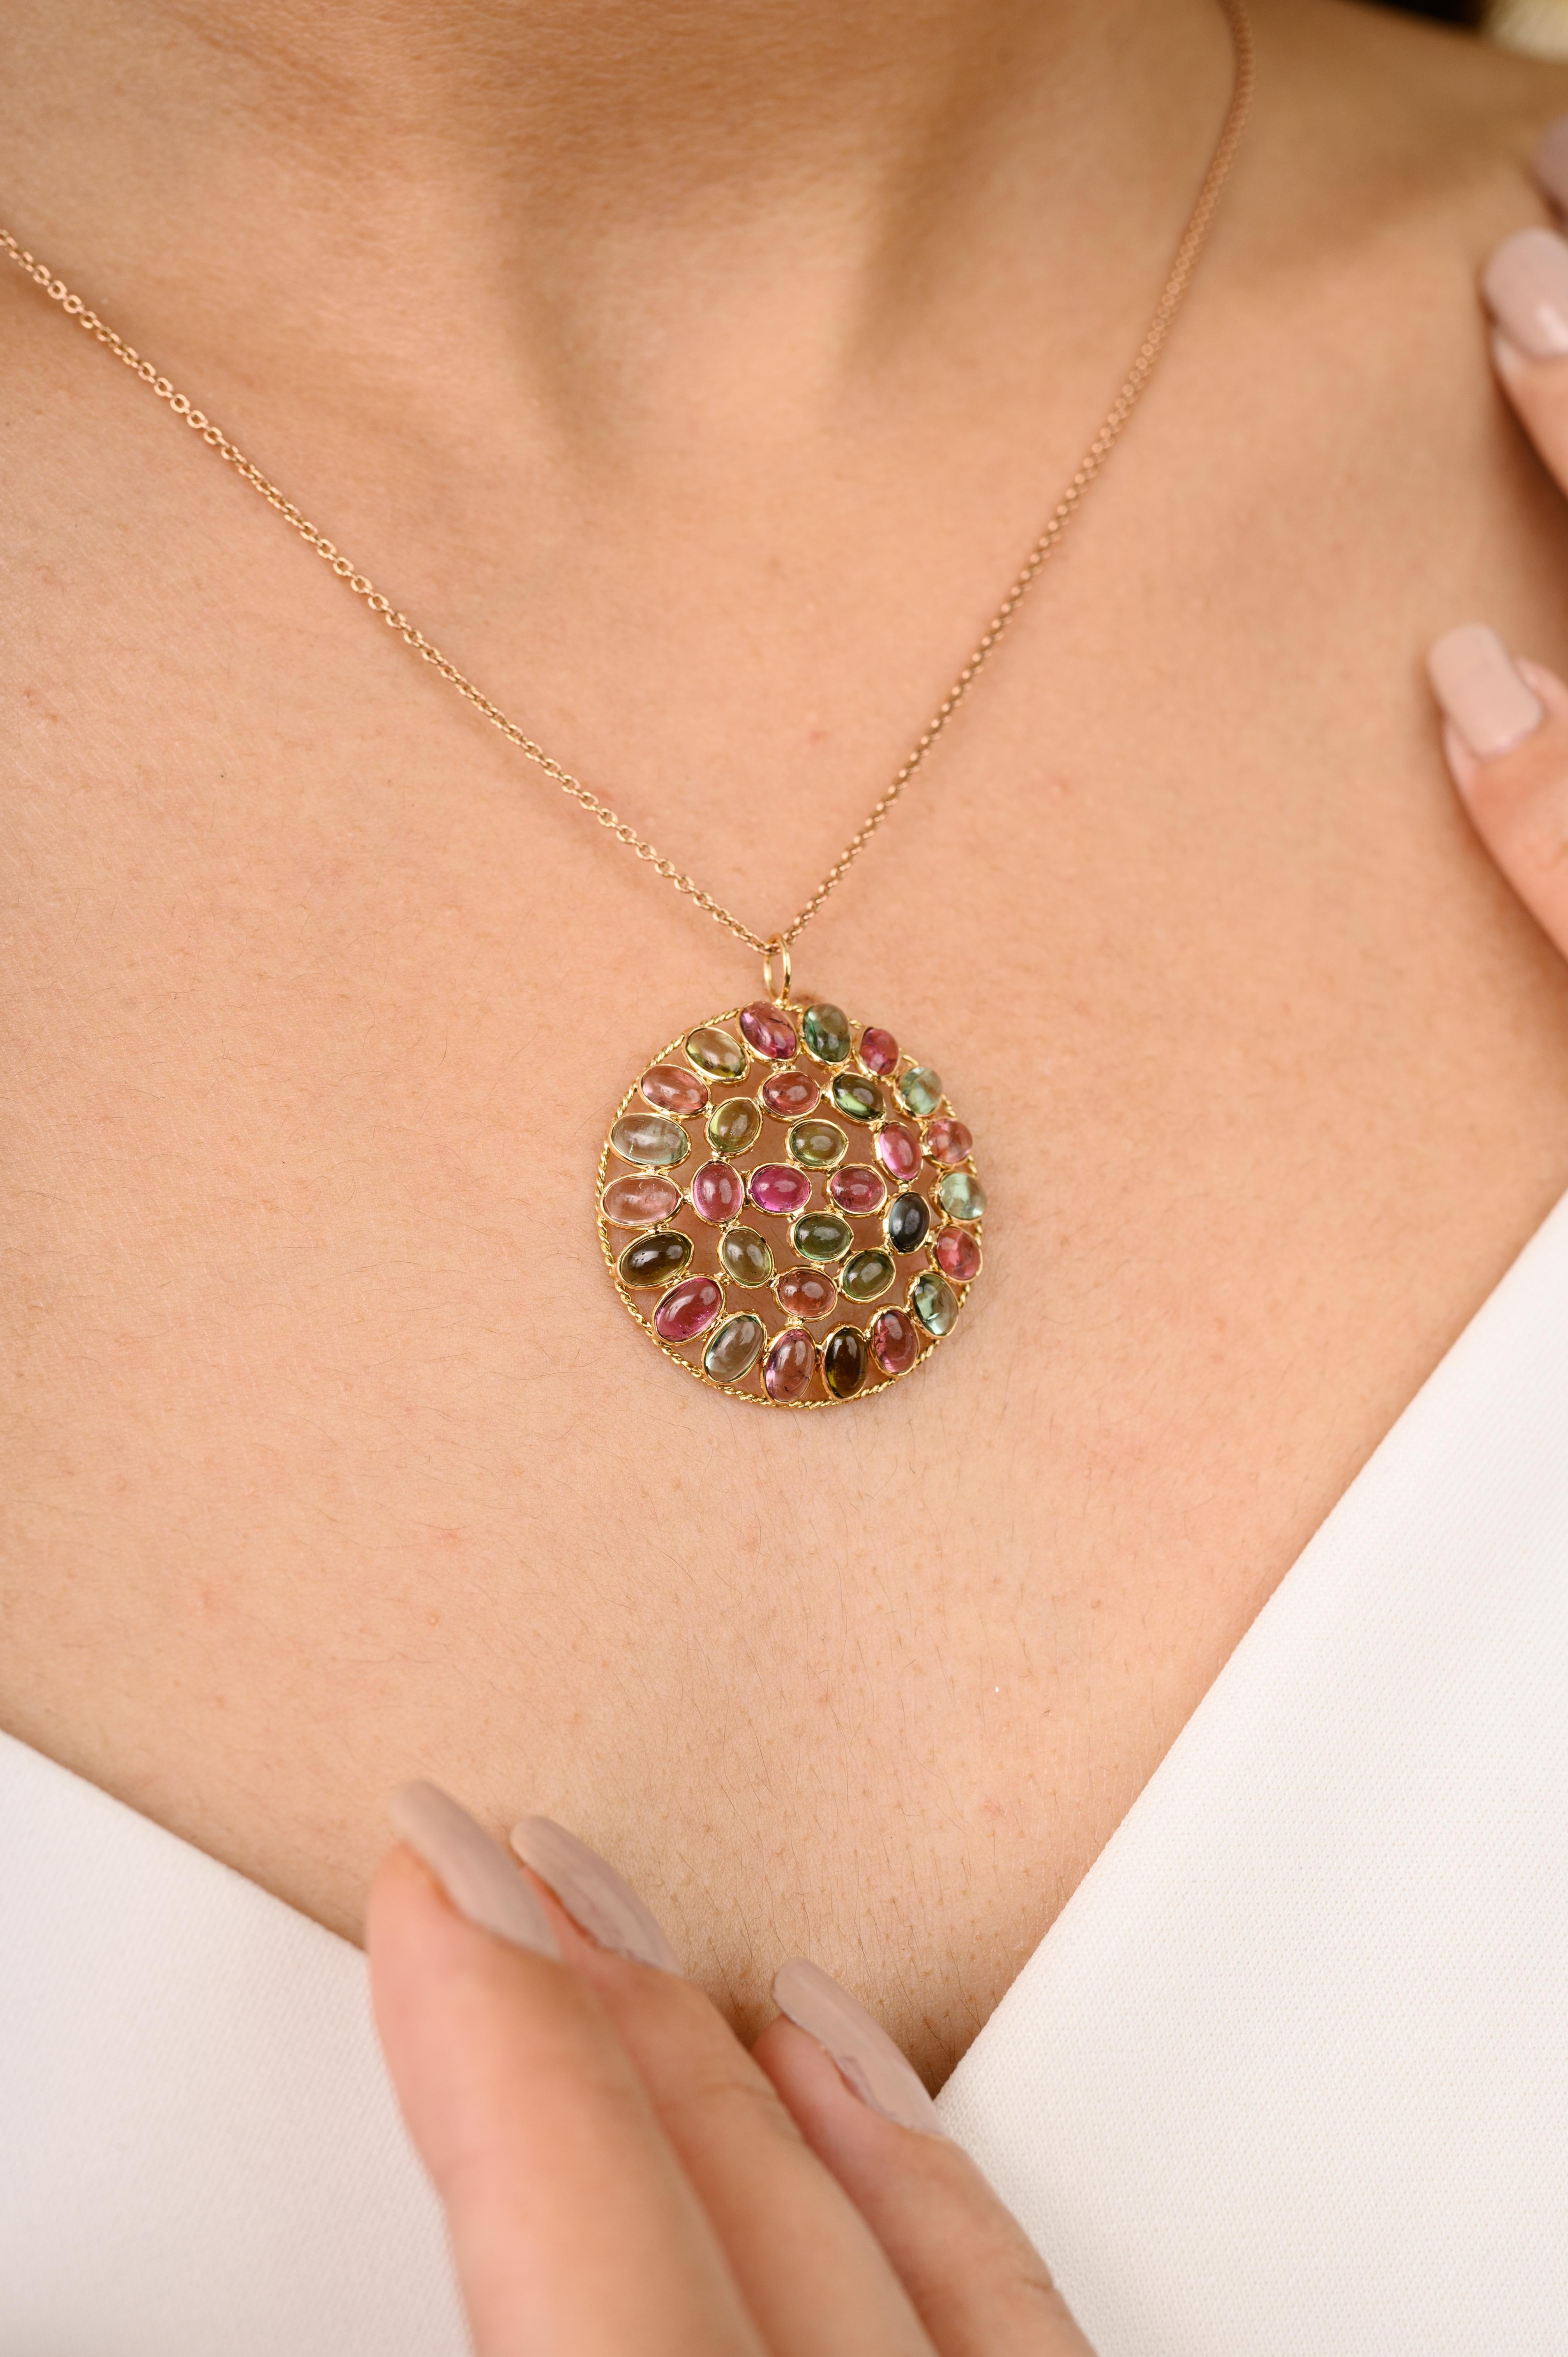 Statement Multi Tourmaline Round Shape Pendant in 18K Gold studded with tourmalines. This stunning piece of jewelry instantly elevates a casual look or dressy outfit. 
Tourmaline creates a shield and prevents negative energies from